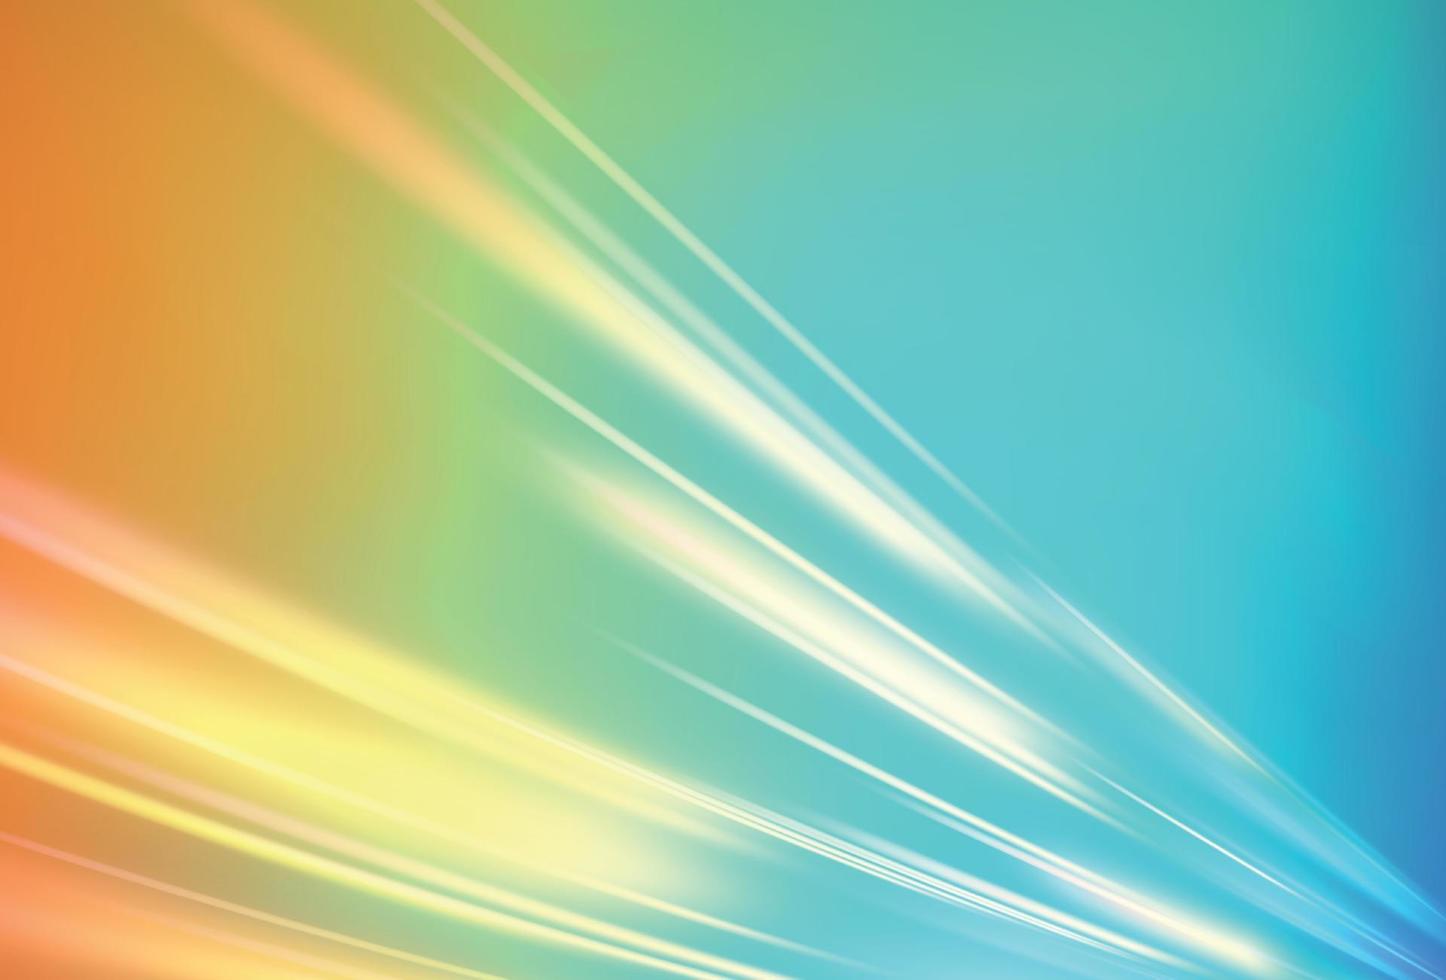 Prismbackground, prism texture. Crystal rainbow lights, refraction effects vector